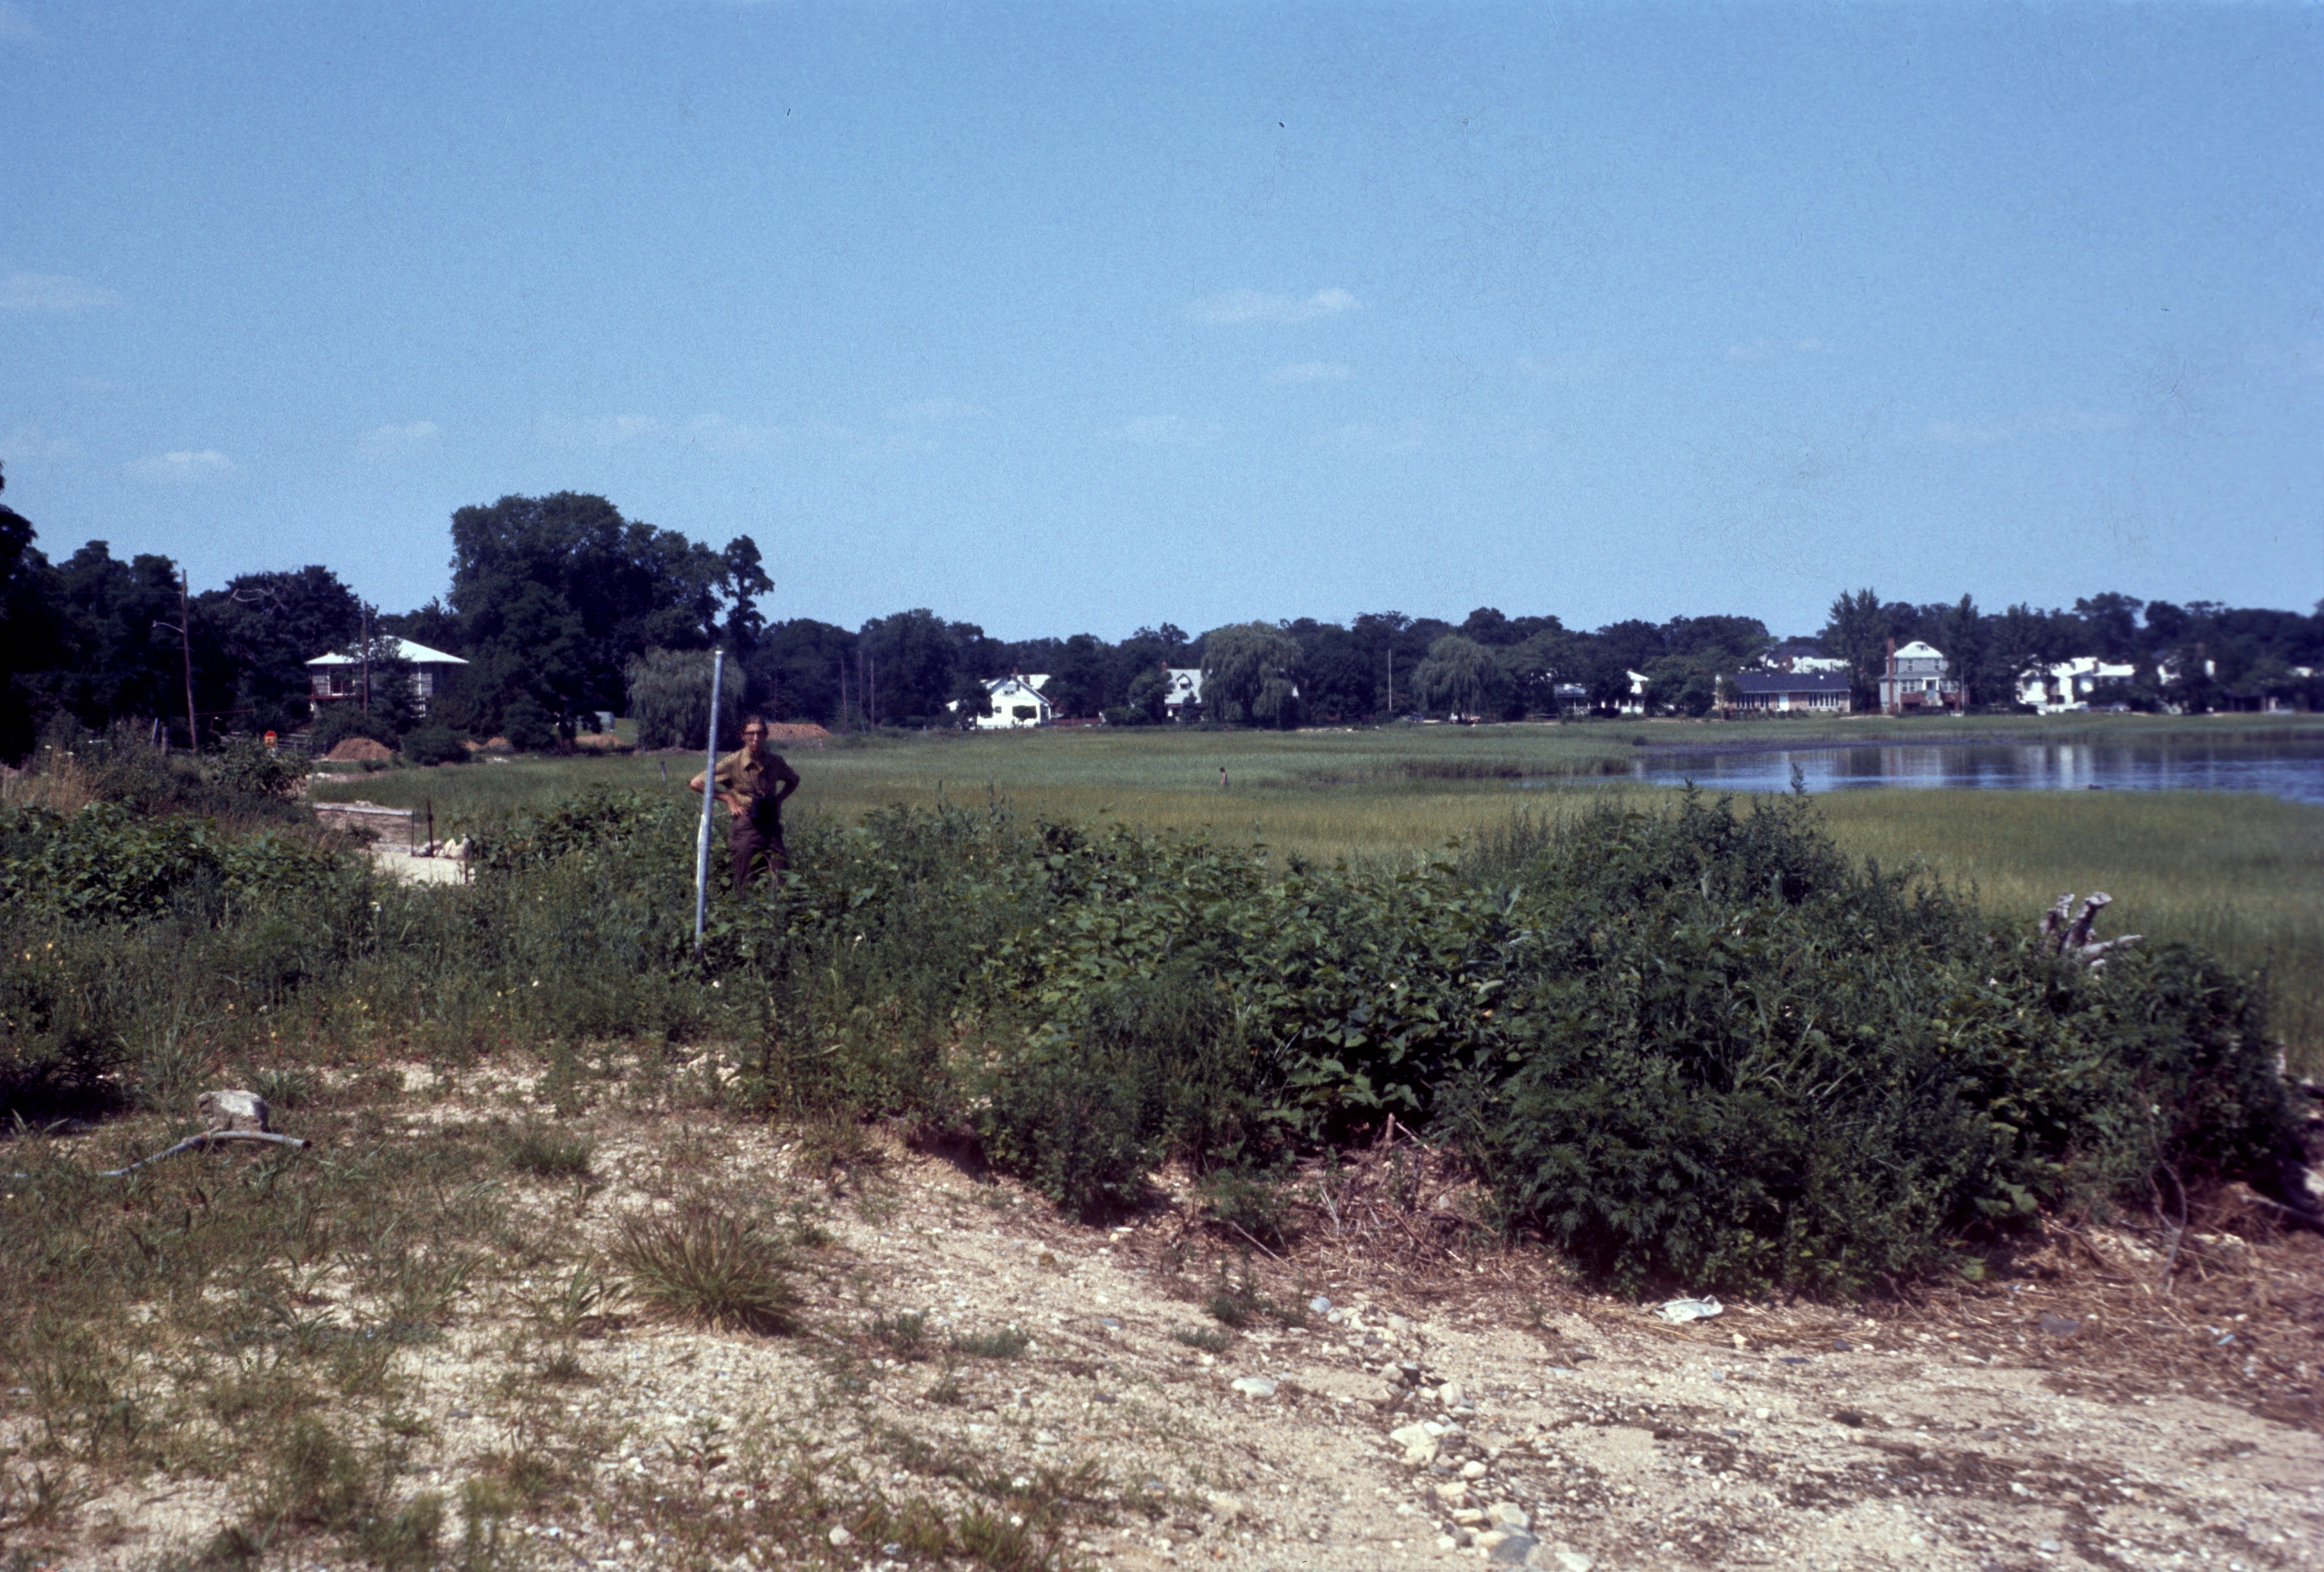 A man stands in marsh dunes surrounded by low shrubs